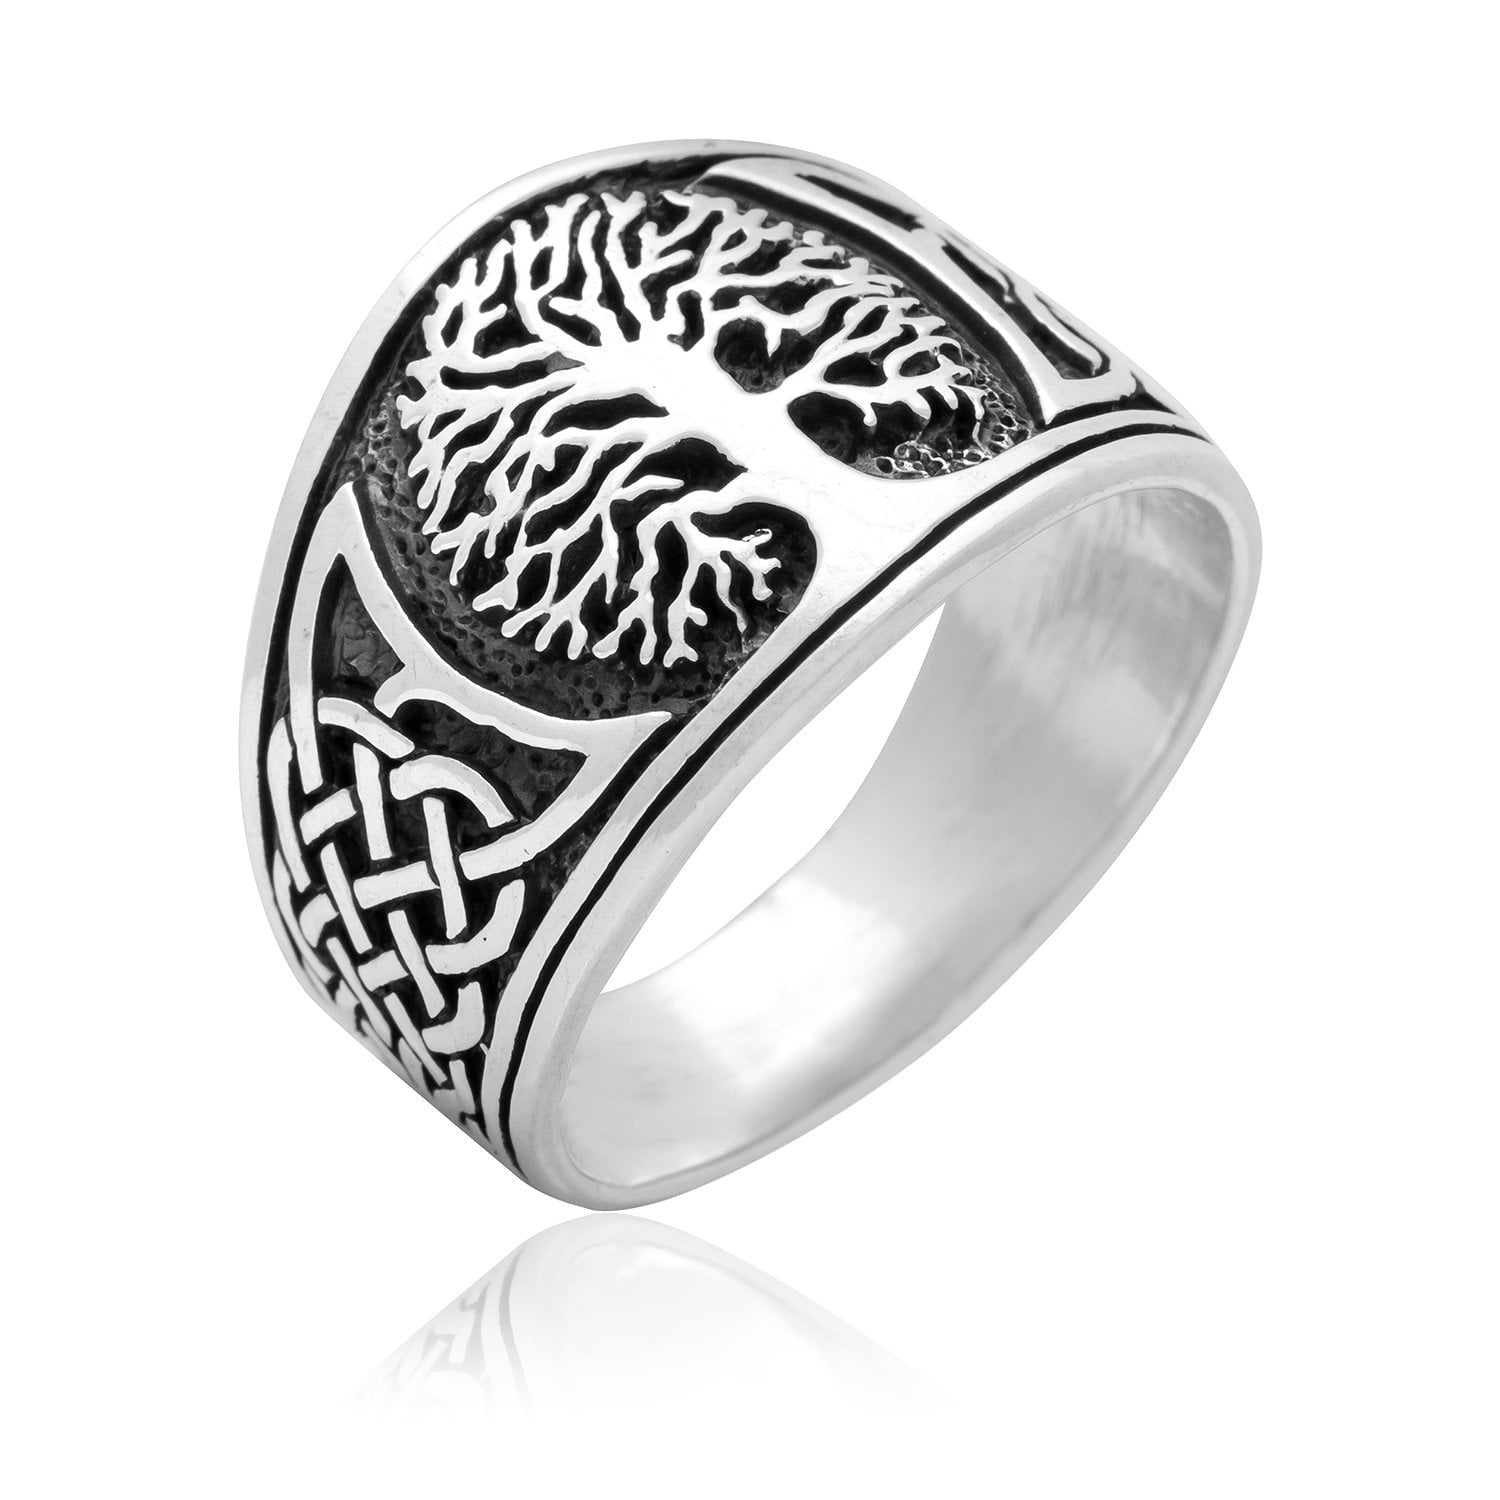 925 Sterling Silver Viking Yggdrasil with Celtic Knotwork Ring - Cosmic Serenity Shop